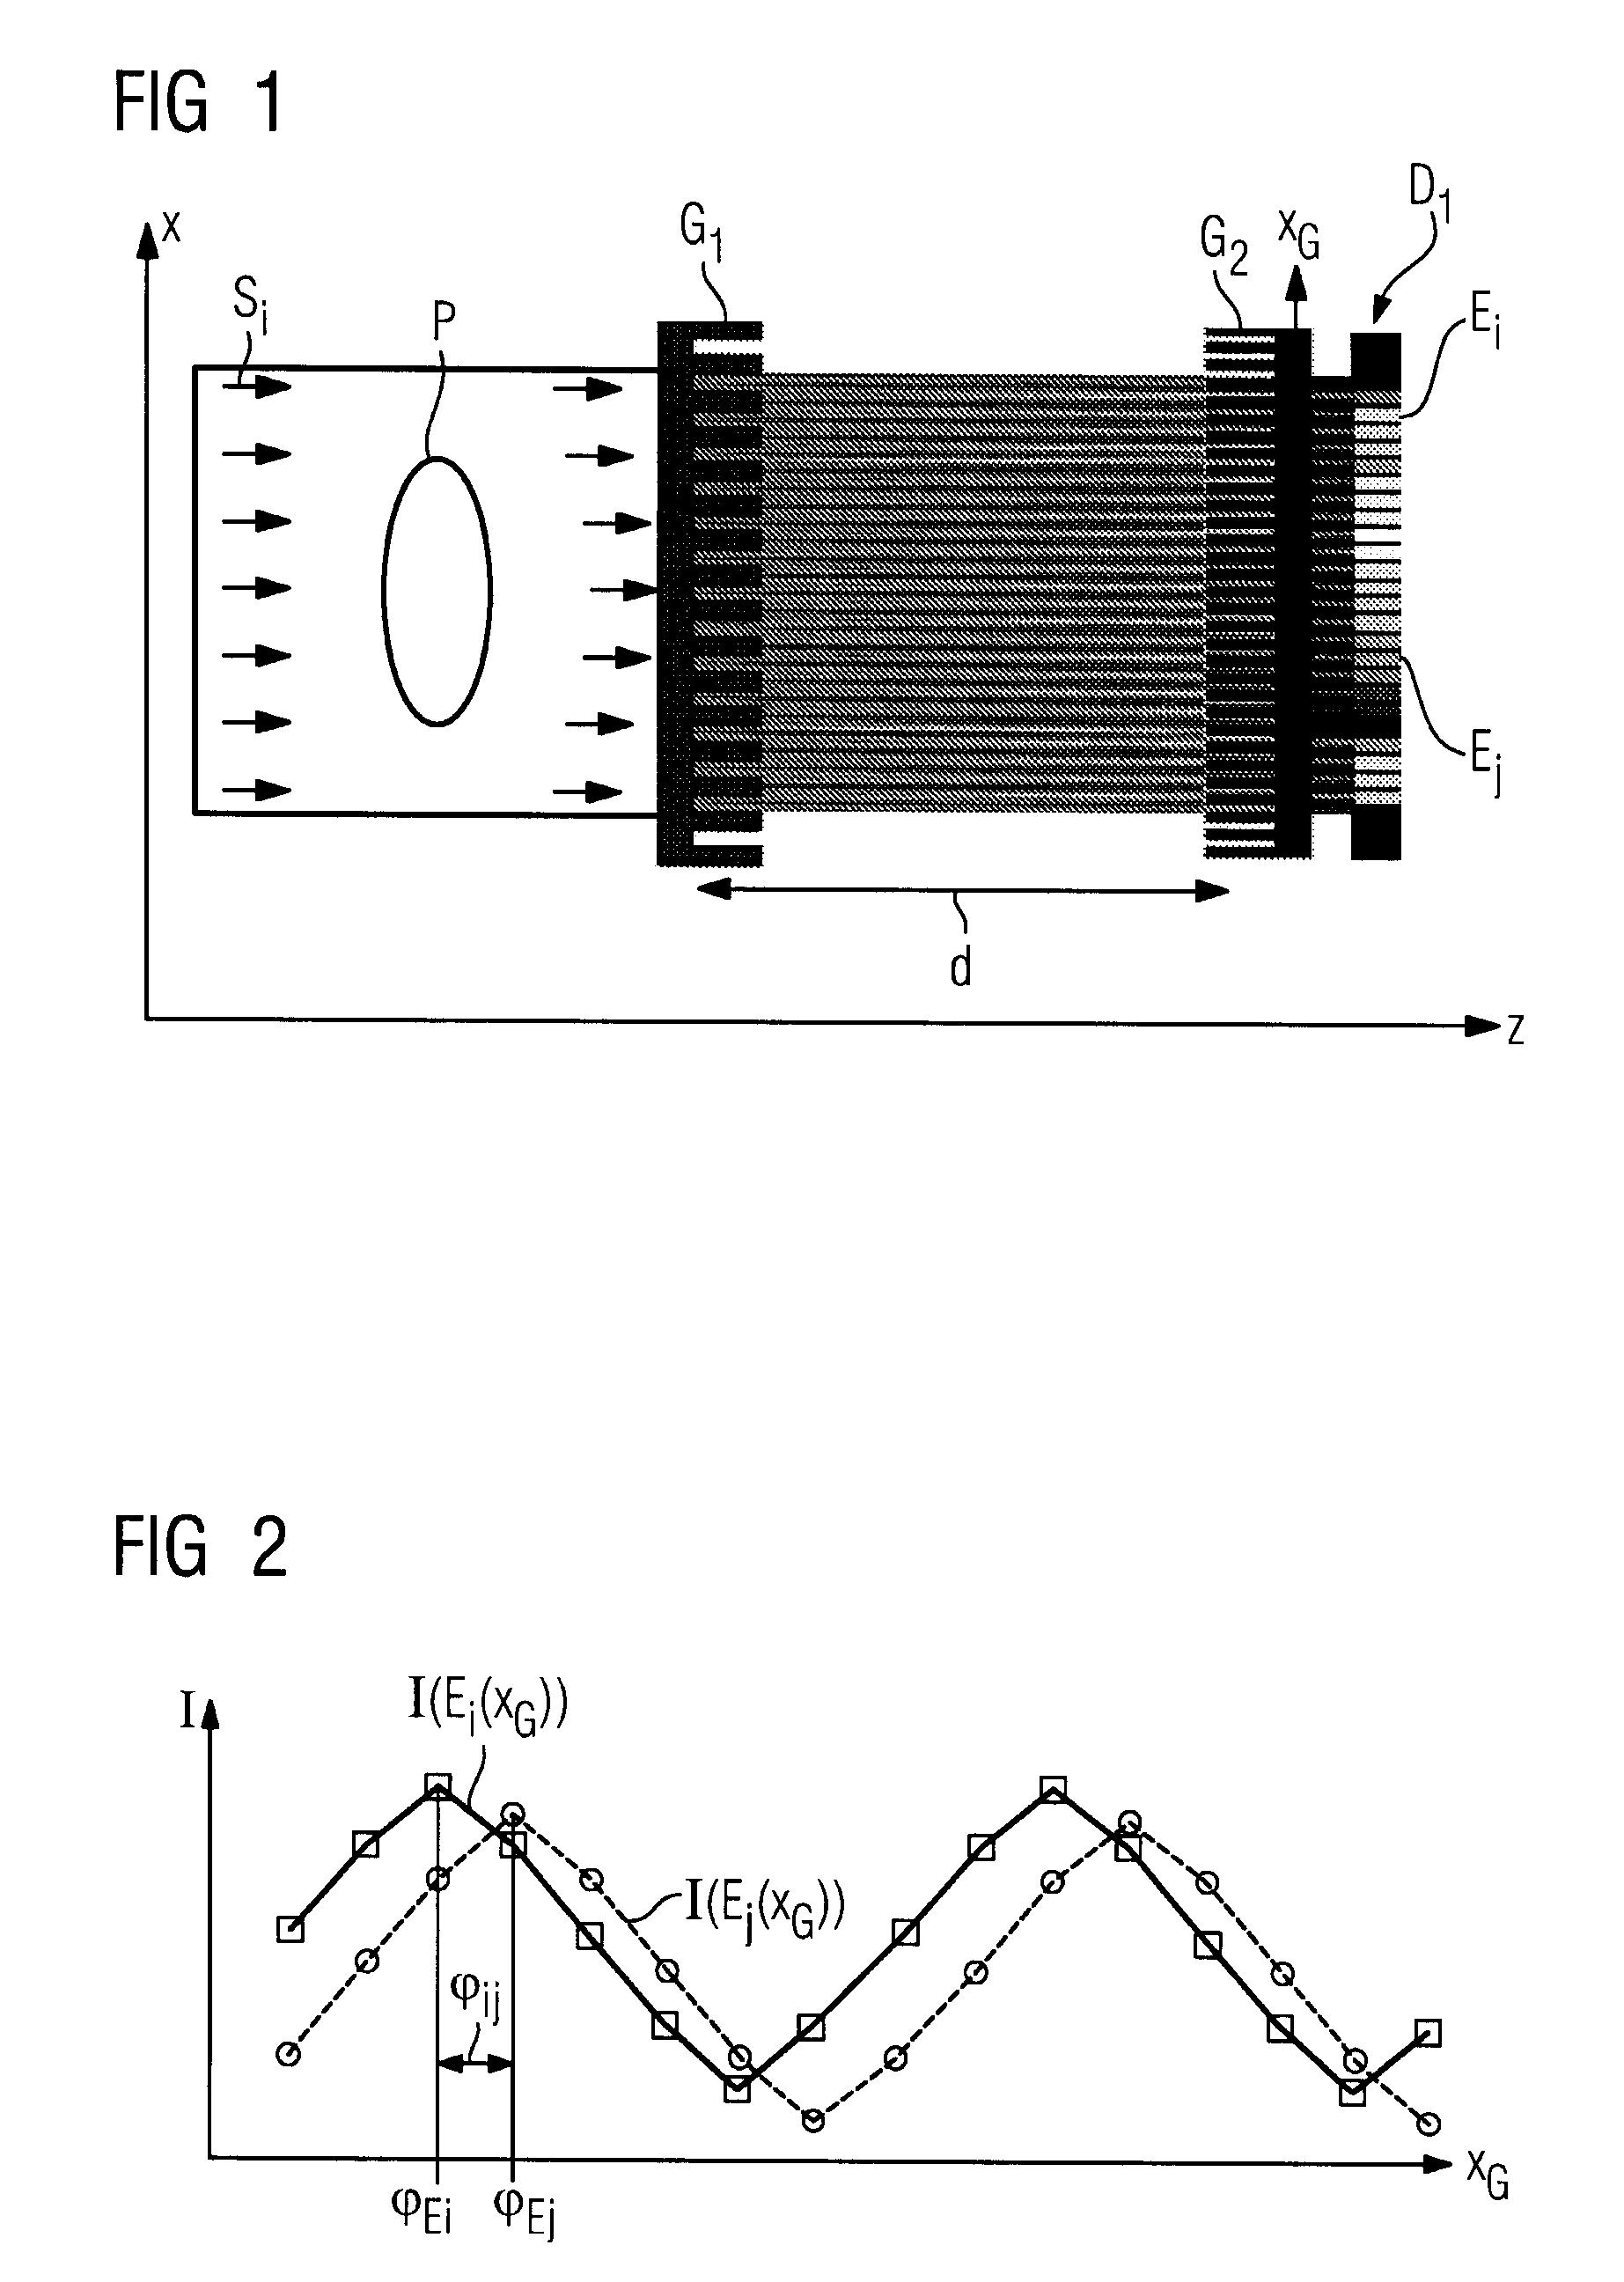 Focus detector arrangement and method for generating contrast x-ray images